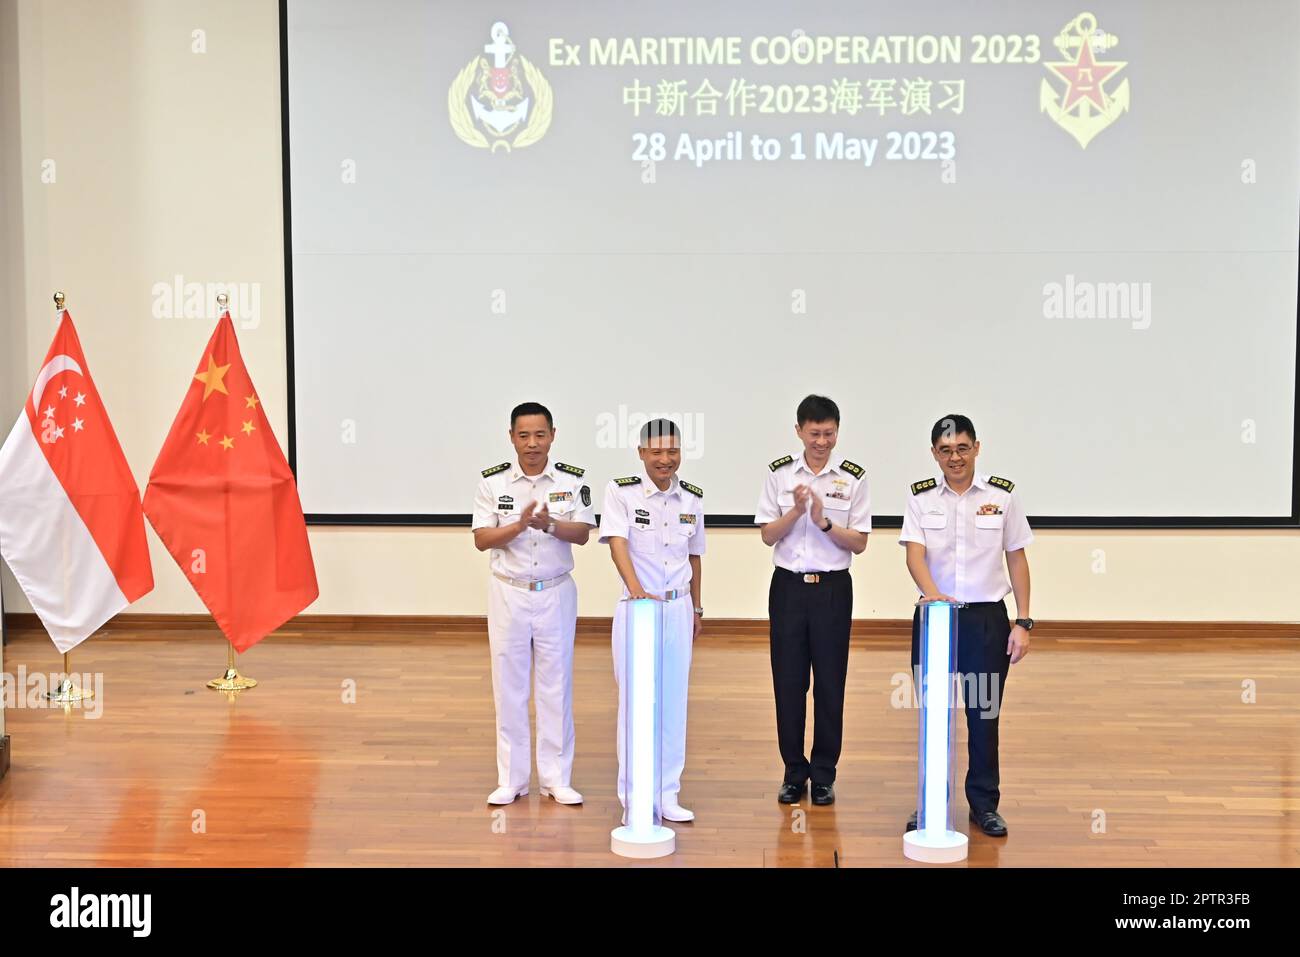 April 28, 2023, Changi, Changi, Singapore: In this photo provided by Singapore's Ministry of Defence, at RSS Singapura ''“ Changi Naval Base, Chief of Staff of Destroyer Flotilla, Southern Theatre Command, Chinese People's Liberation Army (Navy) (PLA[N]) Senior Captain Mei Leyang (second from left). and Commander First Flotilla, Republic of Singapore Navy (RSN) Colonel (COL) Ng Kok Yeng Daniel (right), officiated the Opening Ceremony for Exercise Maritime Cooperation, which was witnessed by Deputy Chief of Political Work Department of Naval Base, PLA(N), Senior Captain Cheng Guochun (left) and Stock Photo